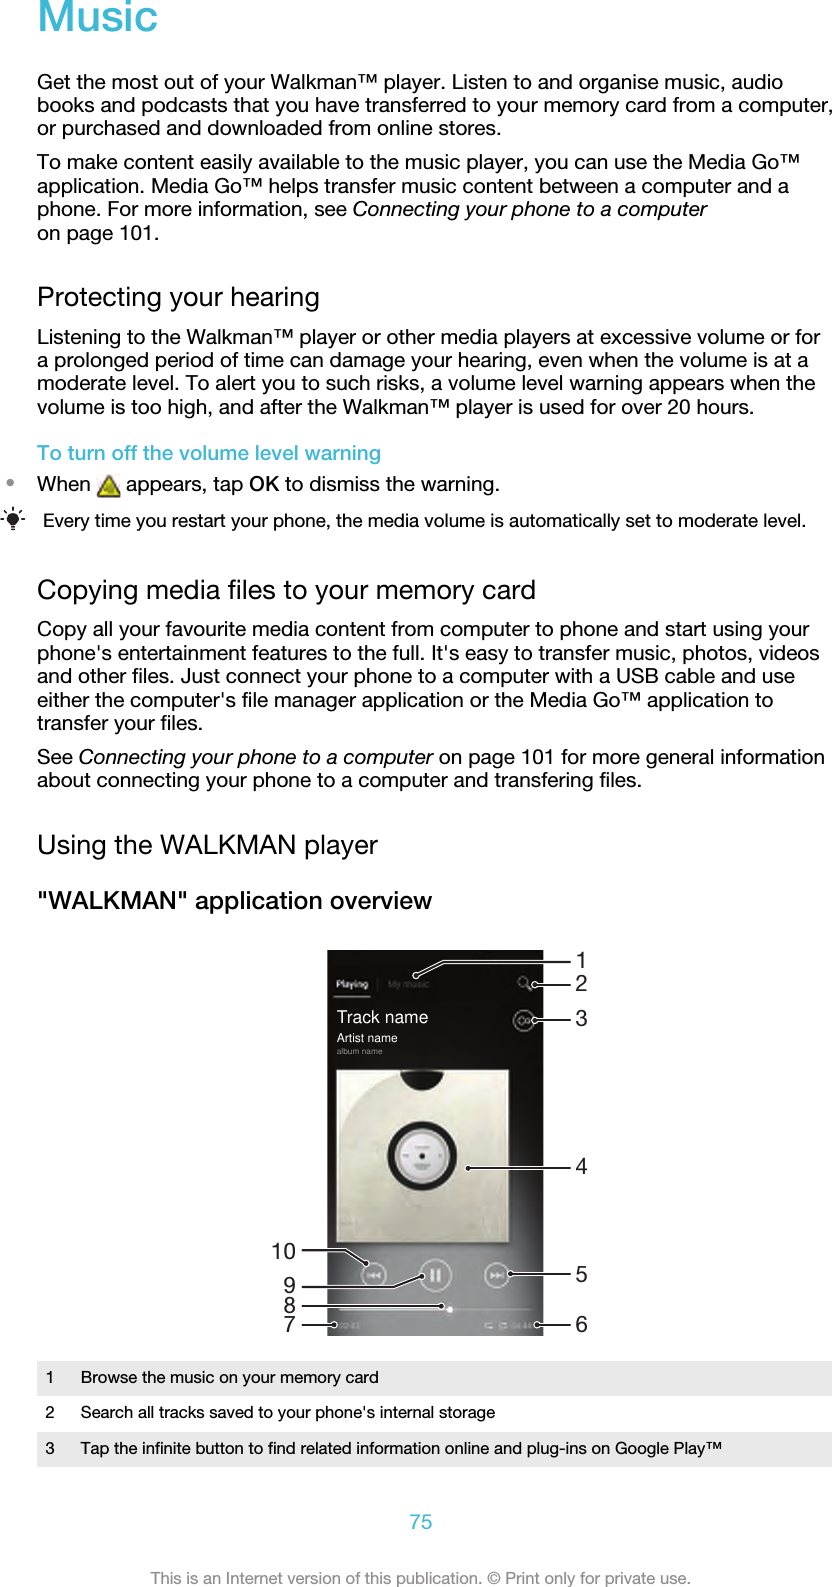 MusicGet the most out of your Walkman™ player. Listen to and organise music, audiobooks and podcasts that you have transferred to your memory card from a computer,or purchased and downloaded from online stores.To make content easily available to the music player, you can use the Media Go™application. Media Go™ helps transfer music content between a computer and aphone. For more information, see Connecting your phone to a computeron page 101.Protecting your hearingListening to the Walkman™ player or other media players at excessive volume or fora prolonged period of time can damage your hearing, even when the volume is at amoderate level. To alert you to such risks, a volume level warning appears when thevolume is too high, and after the Walkman™ player is used for over 20 hours.To turn off the volume level warning•When   appears, tap OK to dismiss the warning.Every time you restart your phone, the media volume is automatically set to moderate level.Copying media files to your memory cardCopy all your favourite media content from computer to phone and start using yourphone&apos;s entertainment features to the full. It&apos;s easy to transfer music, photos, videosand other files. Just connect your phone to a computer with a USB cable and useeither the computer&apos;s file manager application or the Media Go™ application totransfer your files.See Connecting your phone to a computer on page 101 for more general informationabout connecting your phone to a computer and transfering files.Using the WALKMAN player&quot;WALKMAN&quot; application overview10413598672Track nameArtist namealbum name1Browse the music on your memory card2 Search all tracks saved to your phone&apos;s internal storage3 Tap the infinite button to find related information online and plug-ins on Google Play™75This is an Internet version of this publication. © Print only for private use.